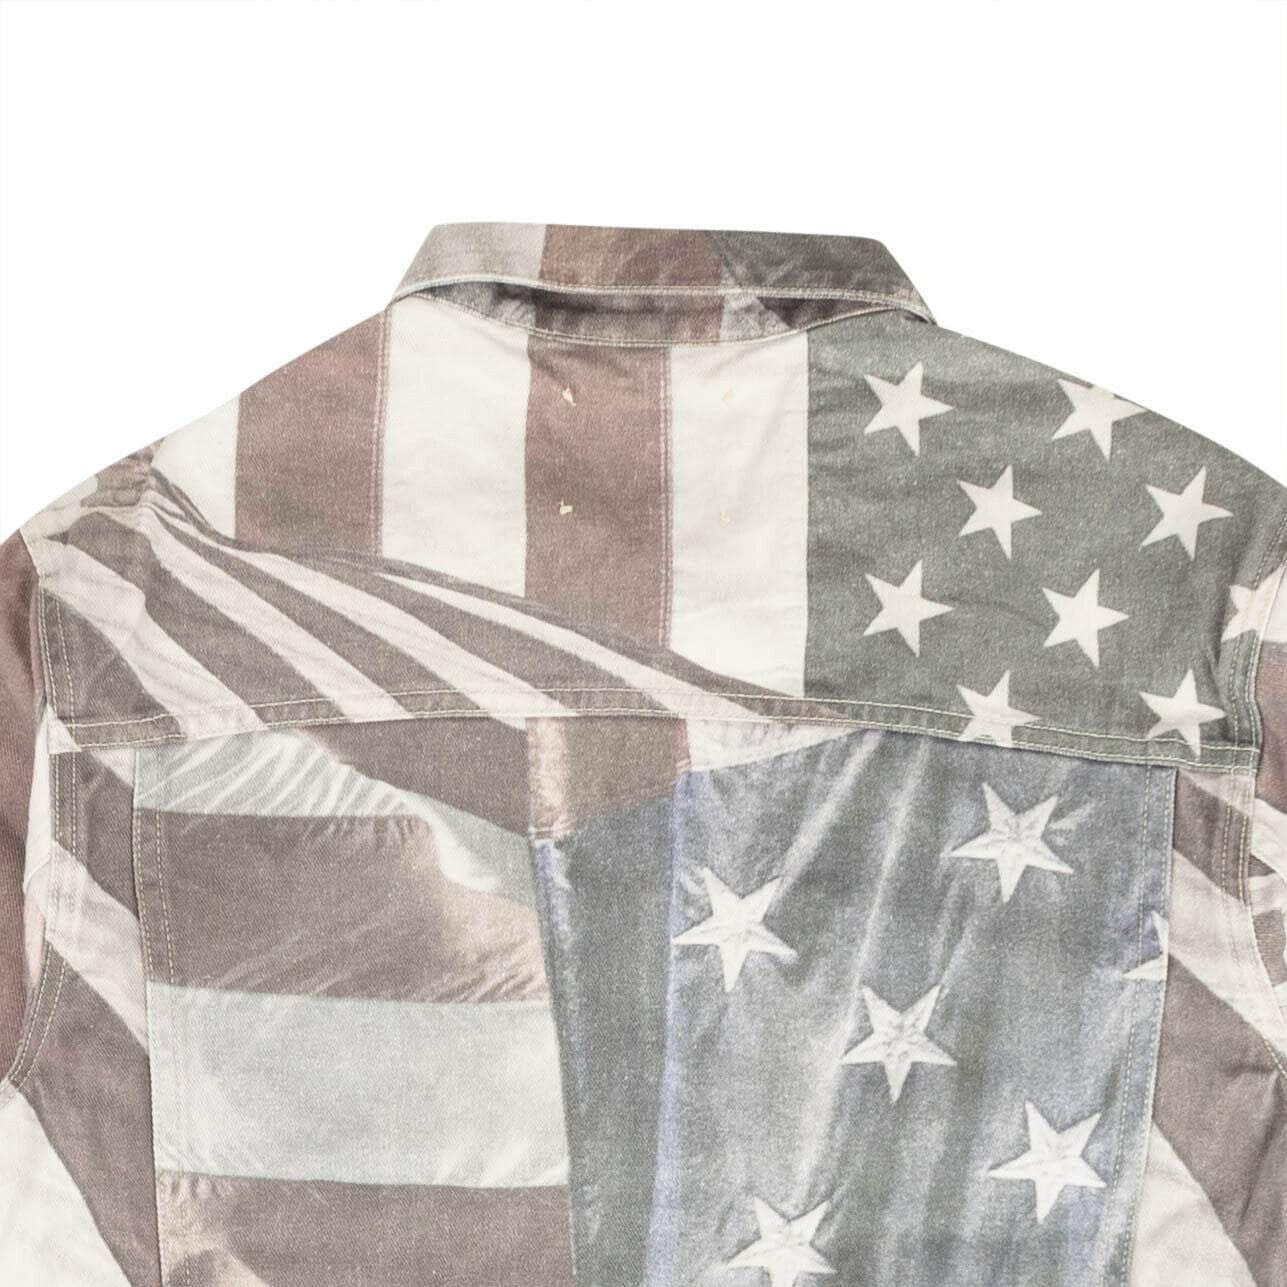 424 ON FAIRFAX 250-500, 424-on-fairfax, channelenable-all, chicmi, couponcollection, gender-mens, main-clothing, mens-denim-jackets, size-l S / 424C-AW19-0002-MUL American Flag Denim Jacket 95-424-0006/S 95-424-0006/S